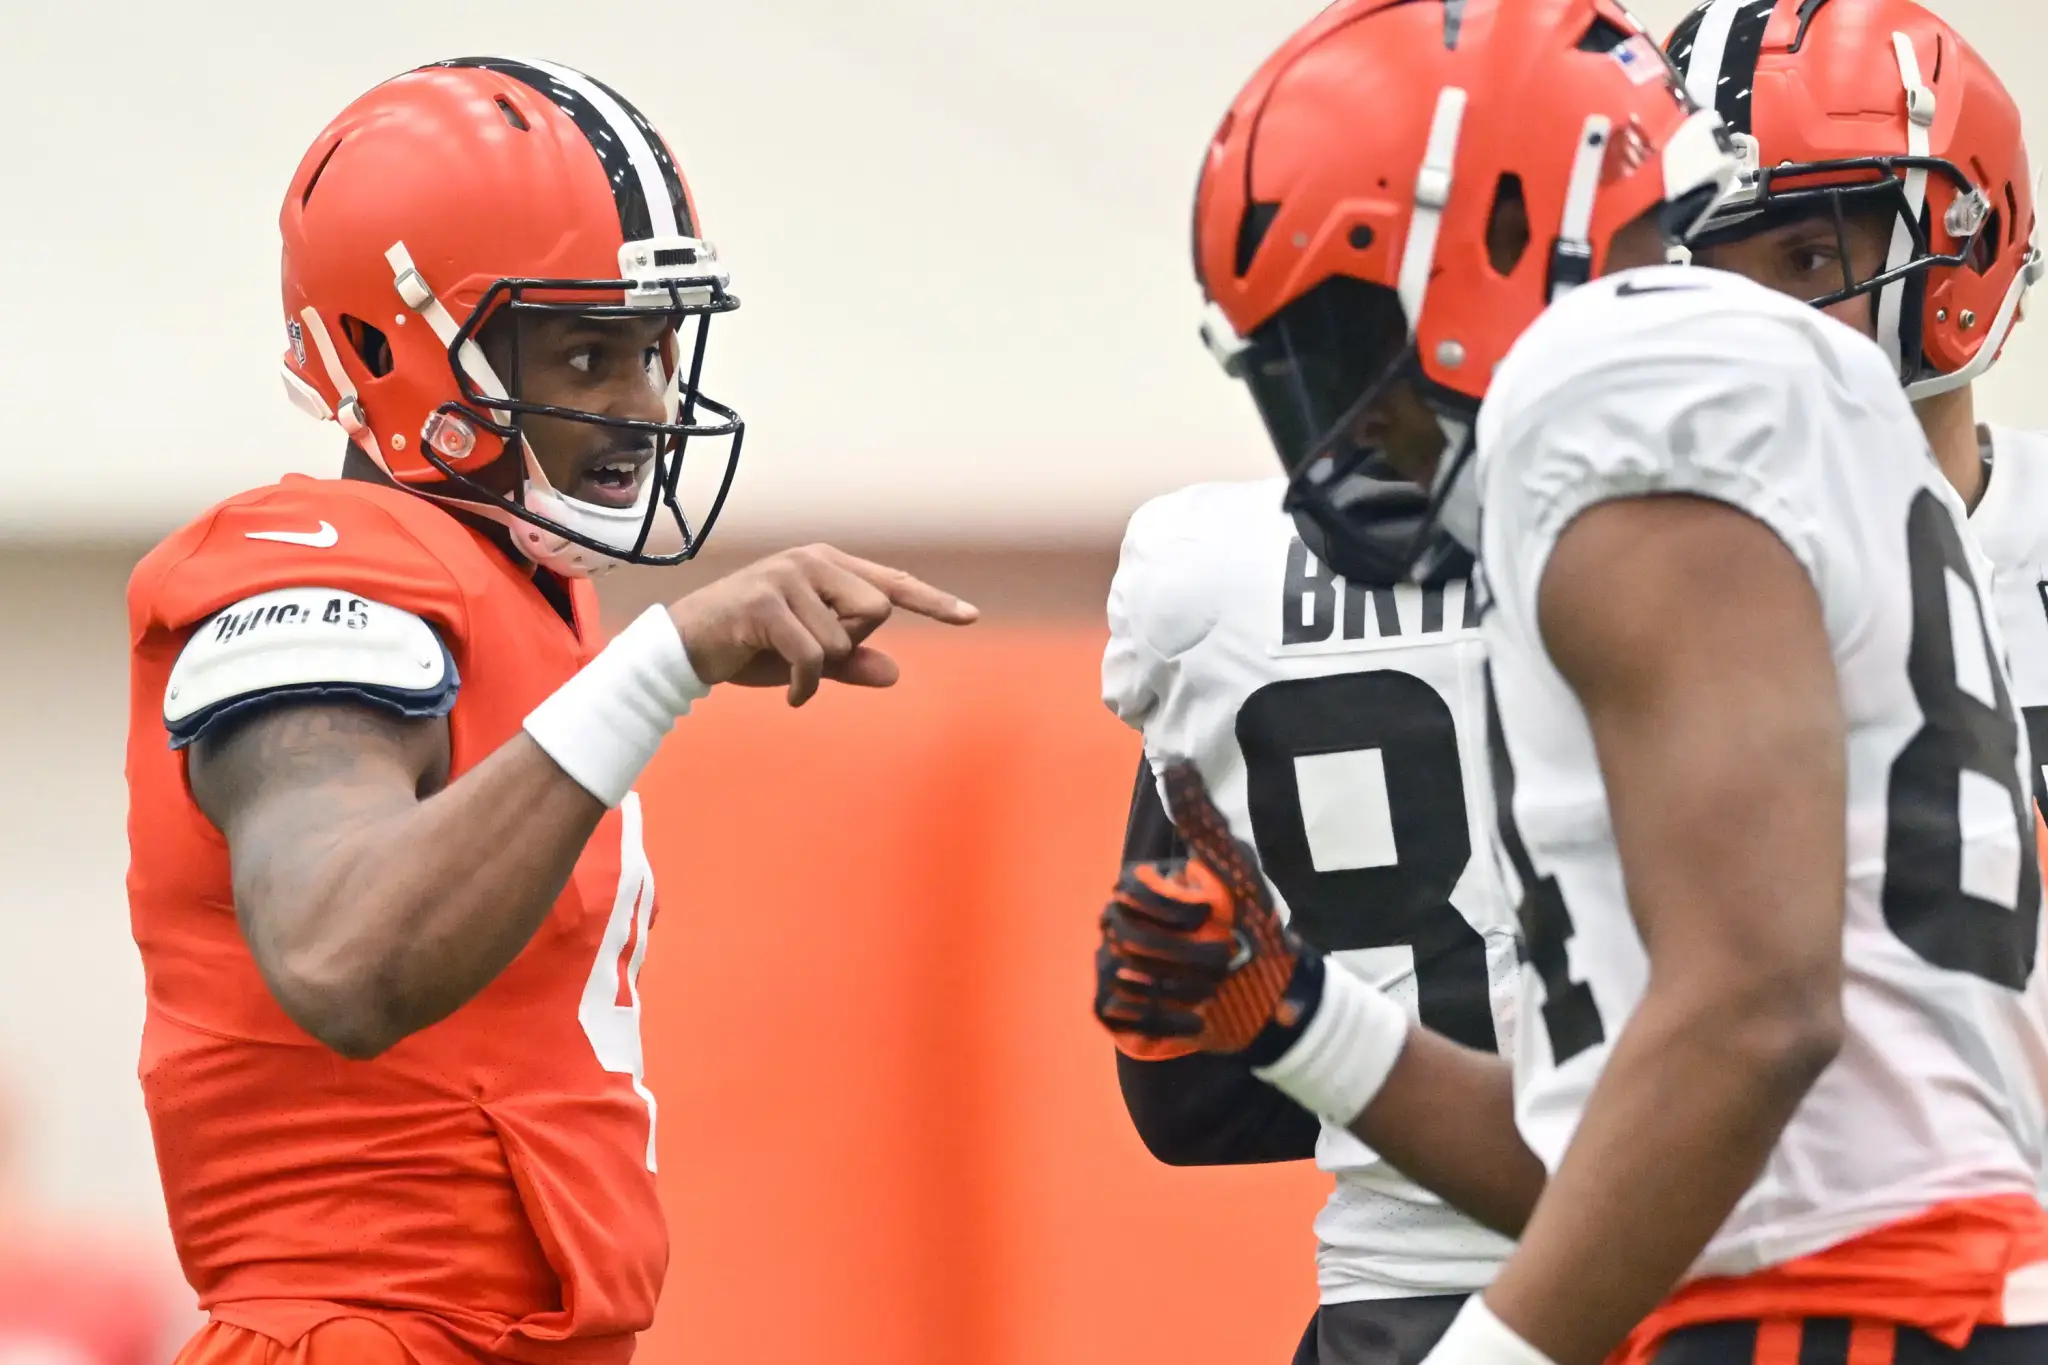 Rust issues? Deshaun Watson's long layoff could be factor